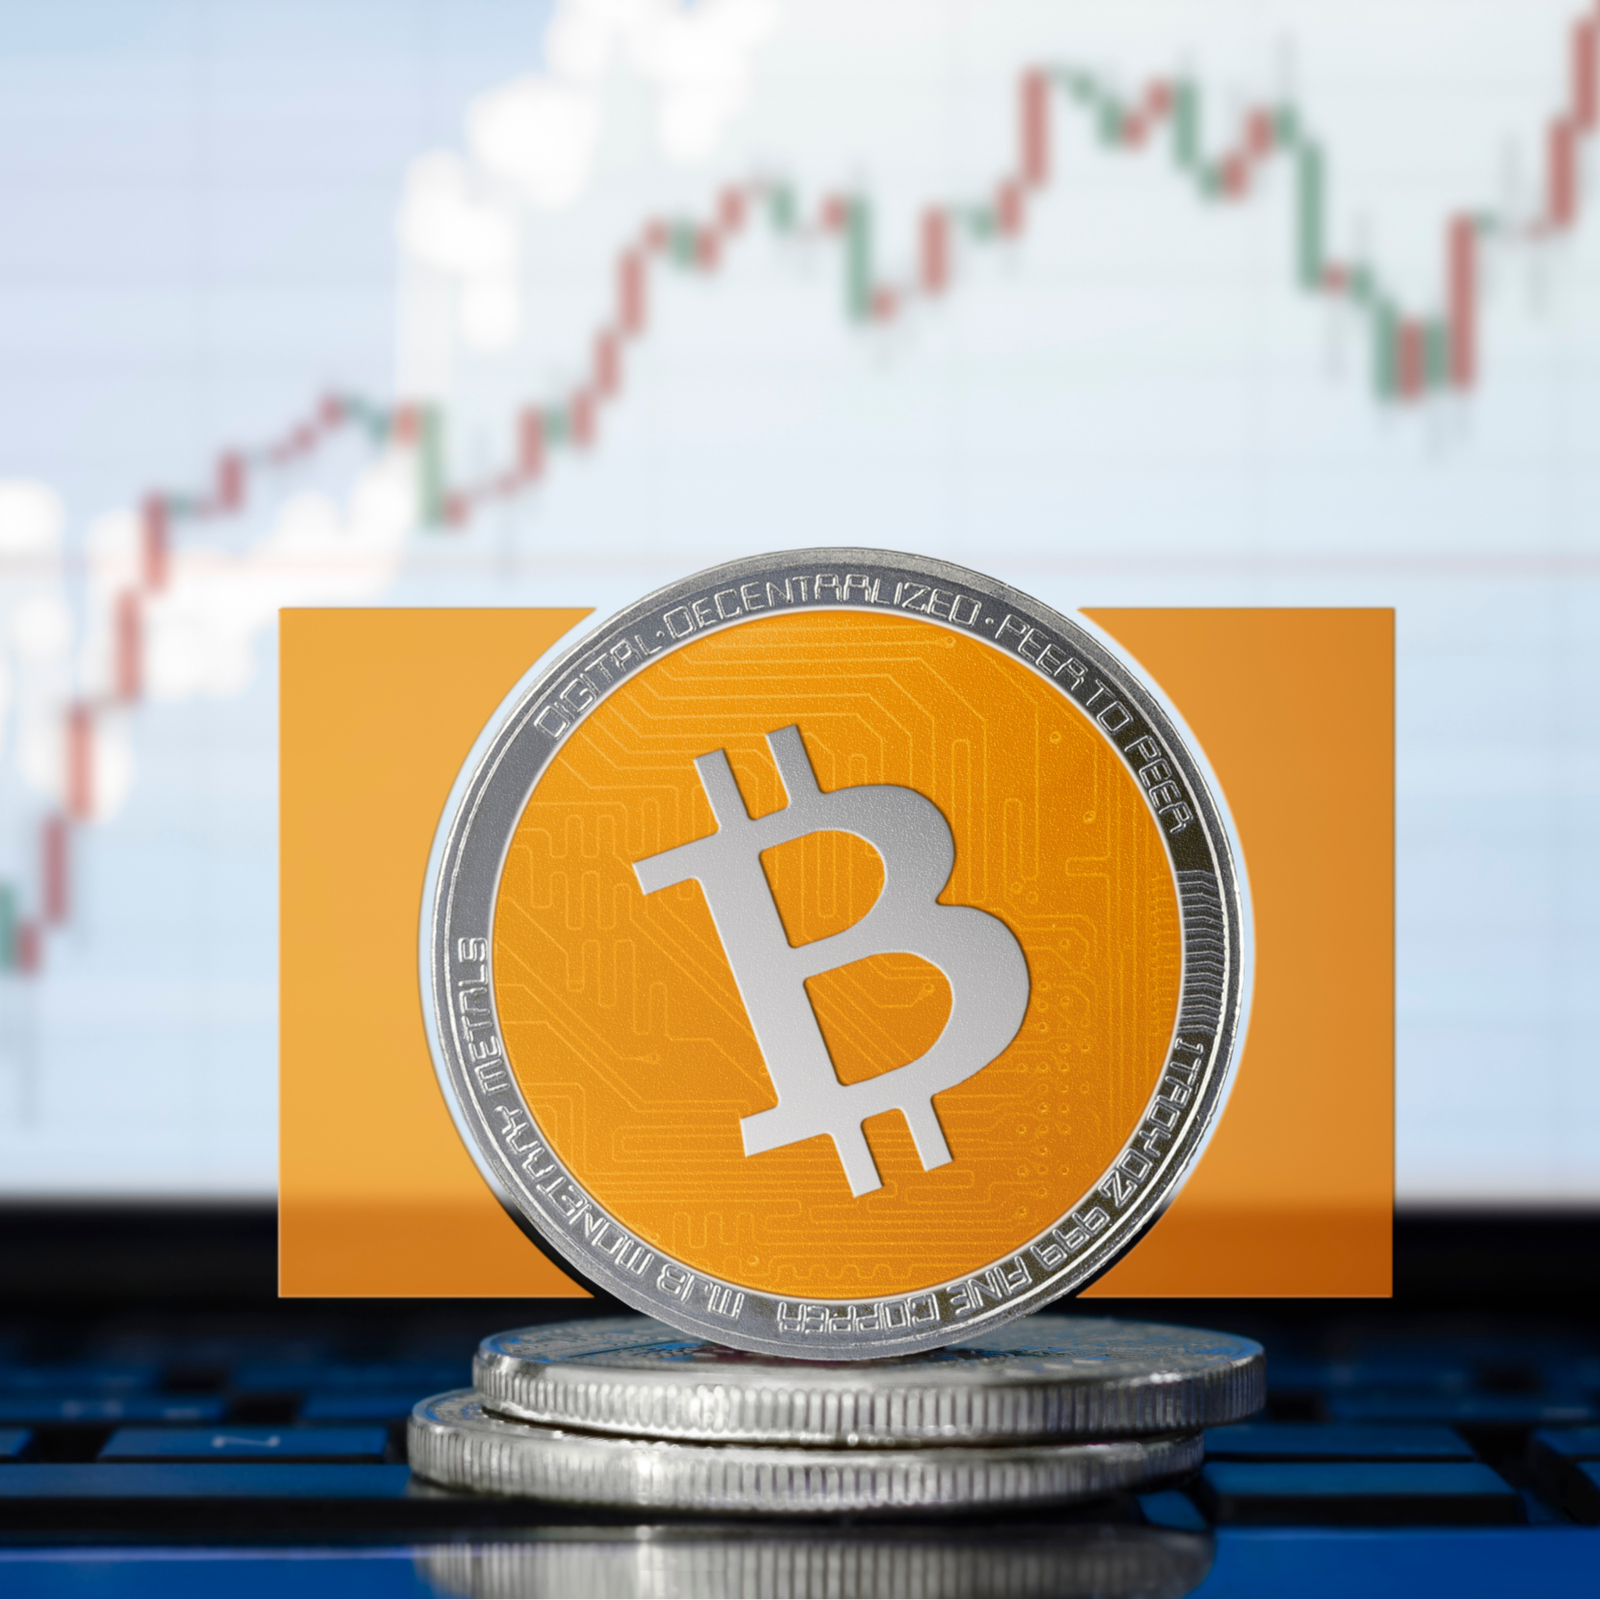 markets supported by bitcoin cash